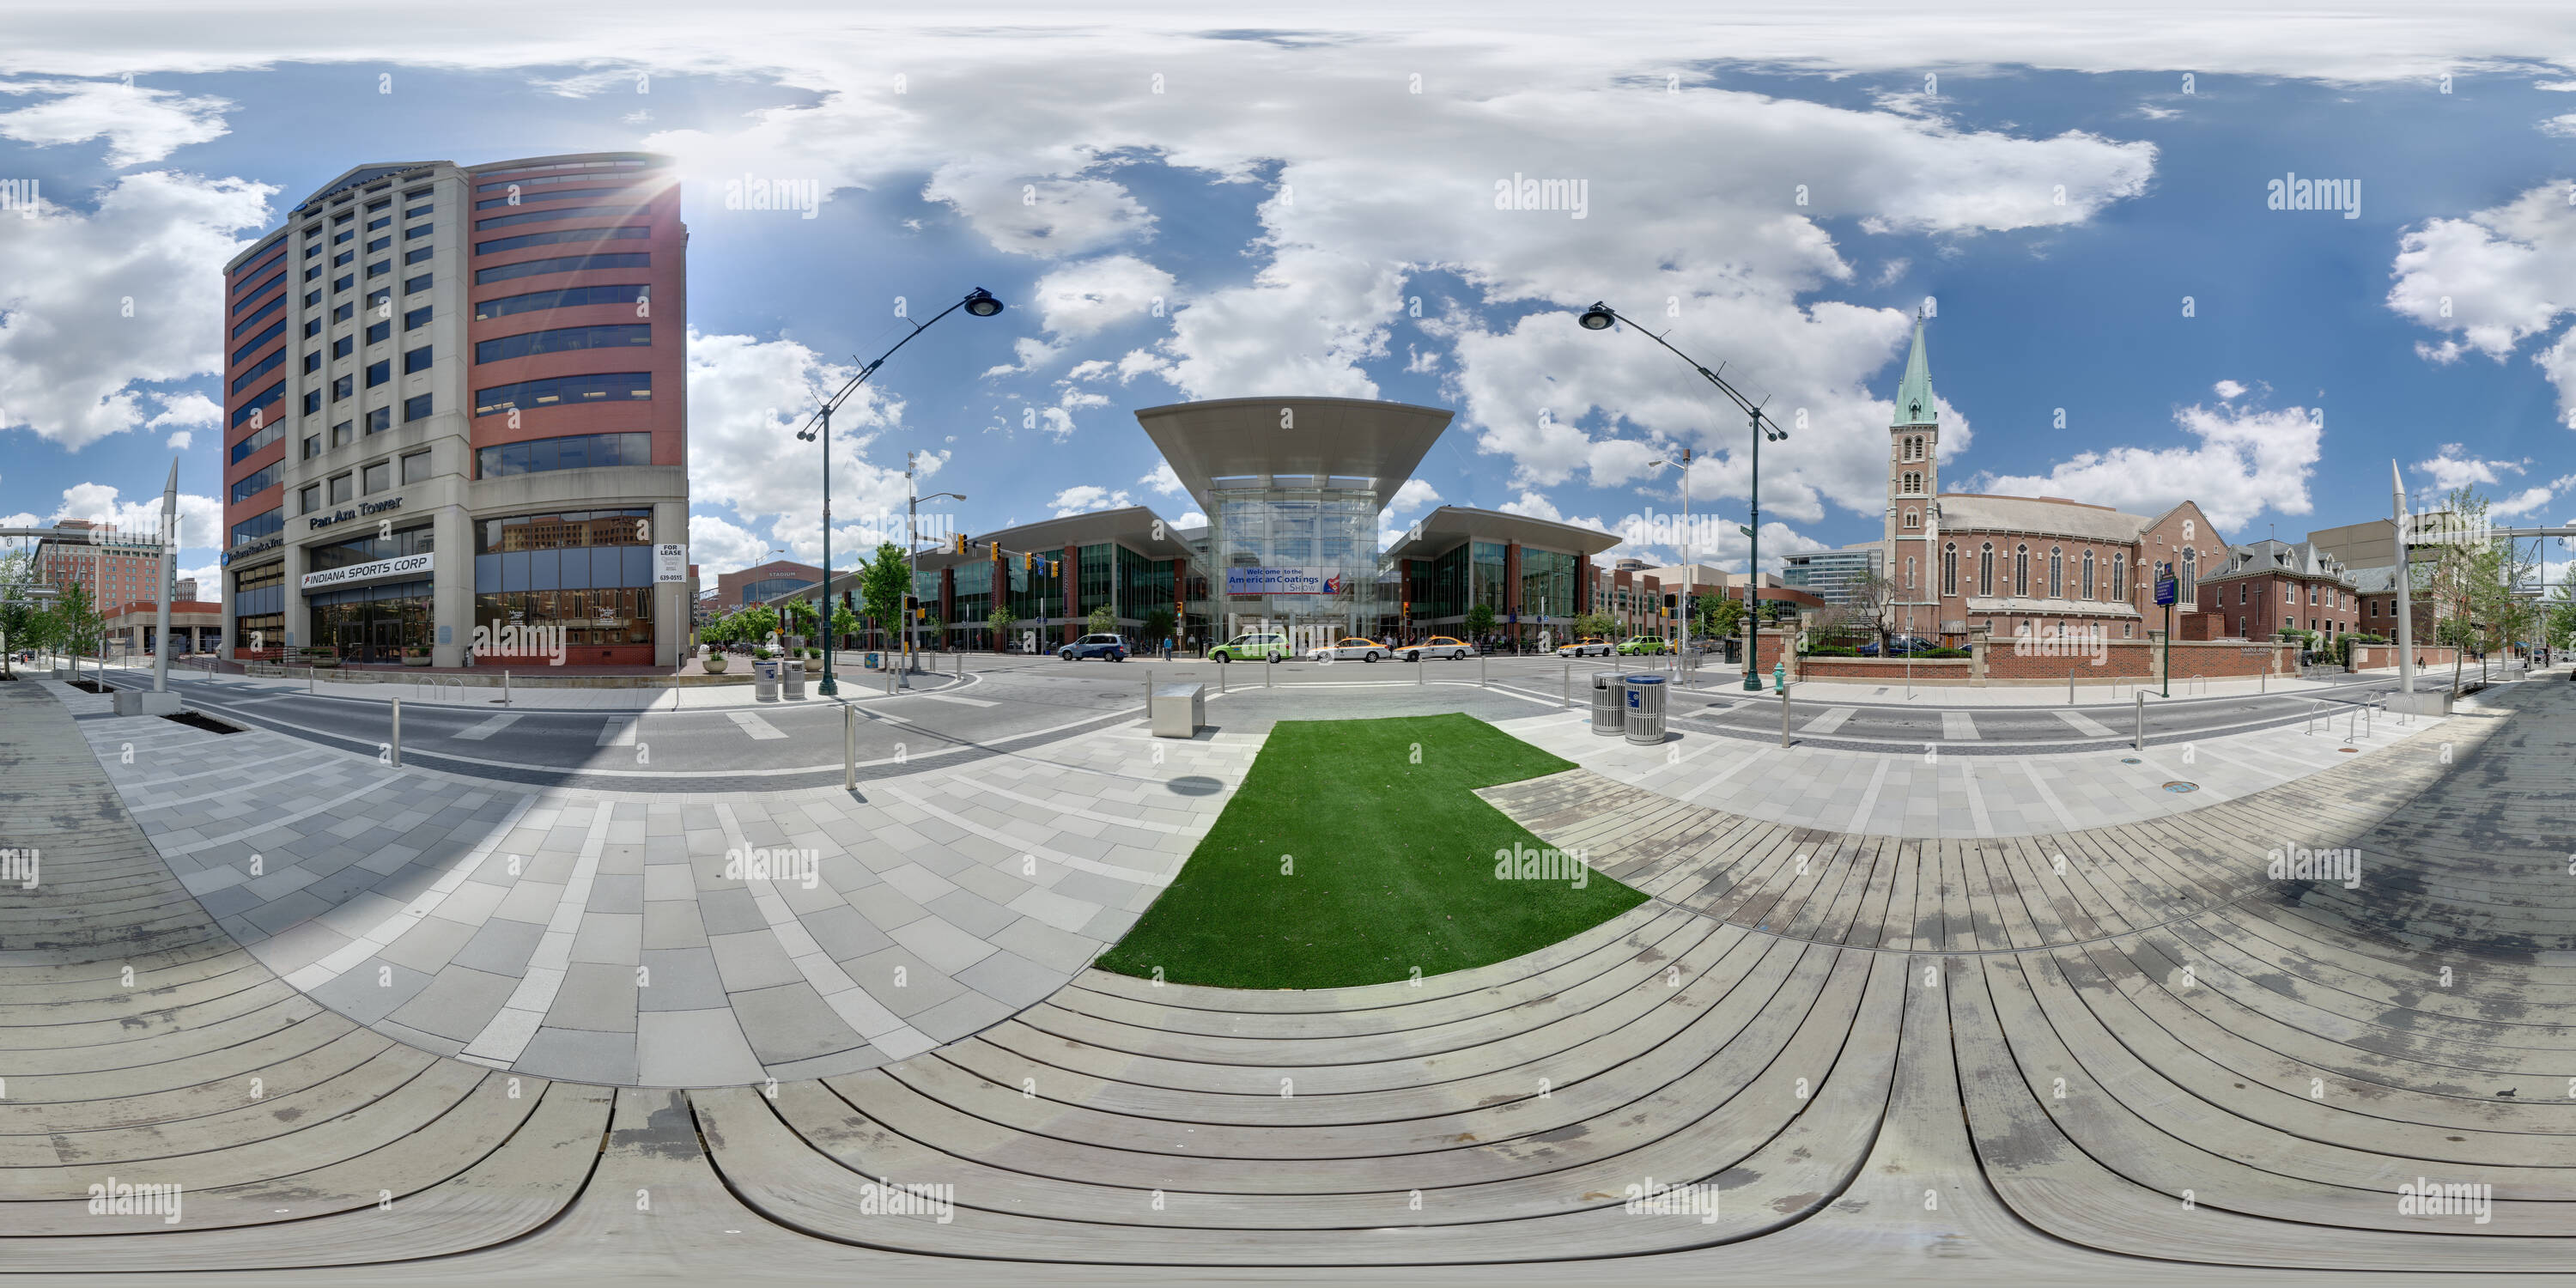 360° view of Indianapolis Convention Center Alamy